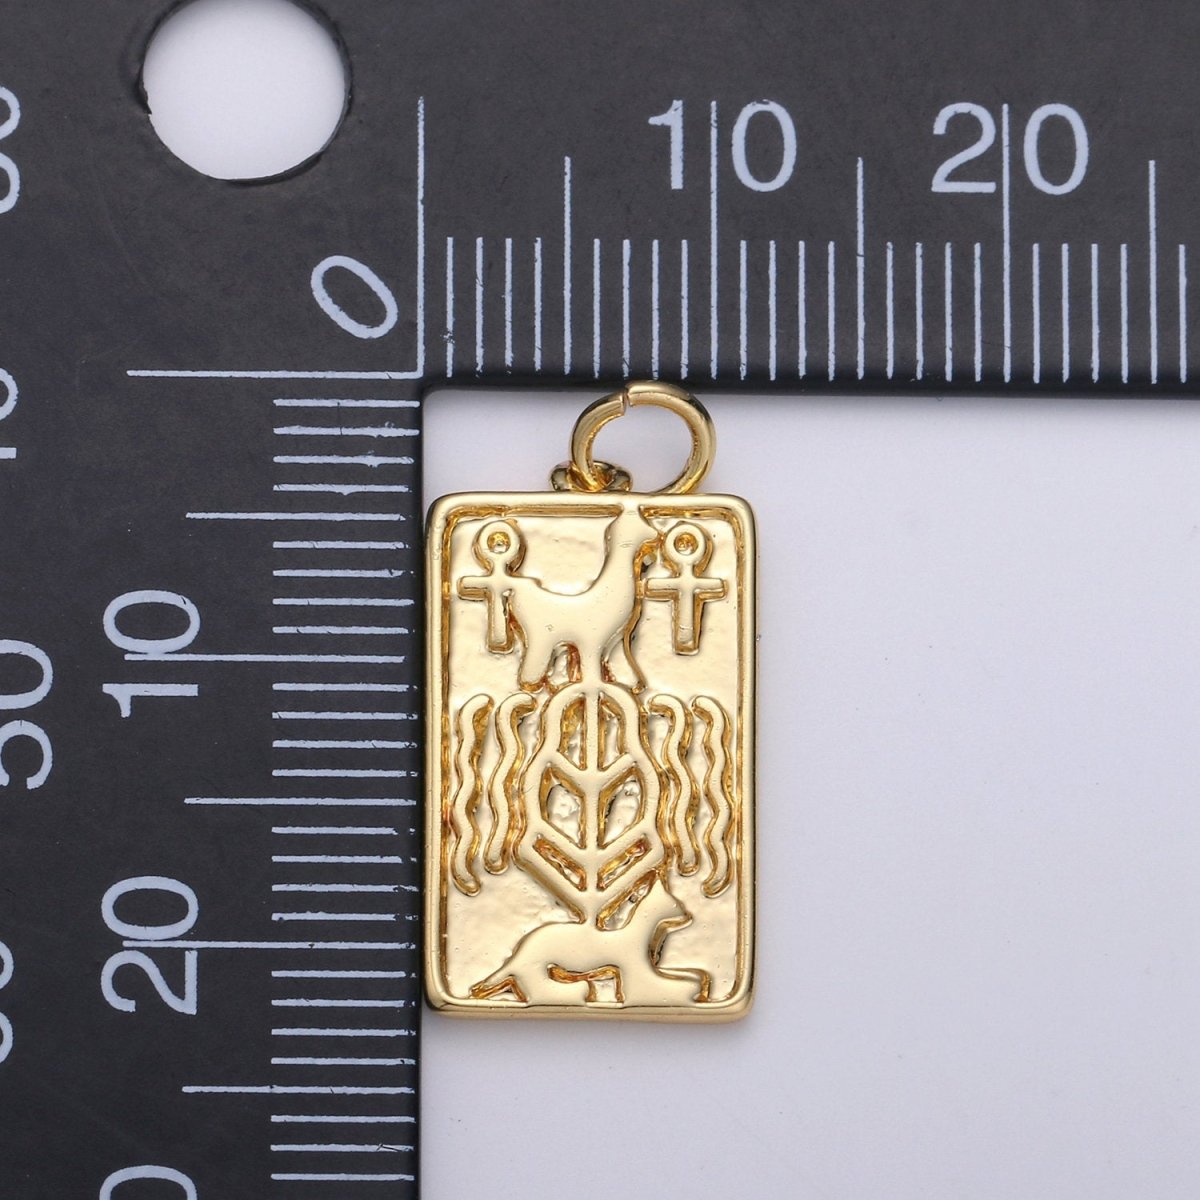 14k Gold Filled Tag Egyptian Ankh Life Symbol Key Charm Size 23x10mm Gold Charm Egyptian Pendant For Jewelry Making D-575 - DLUXCA